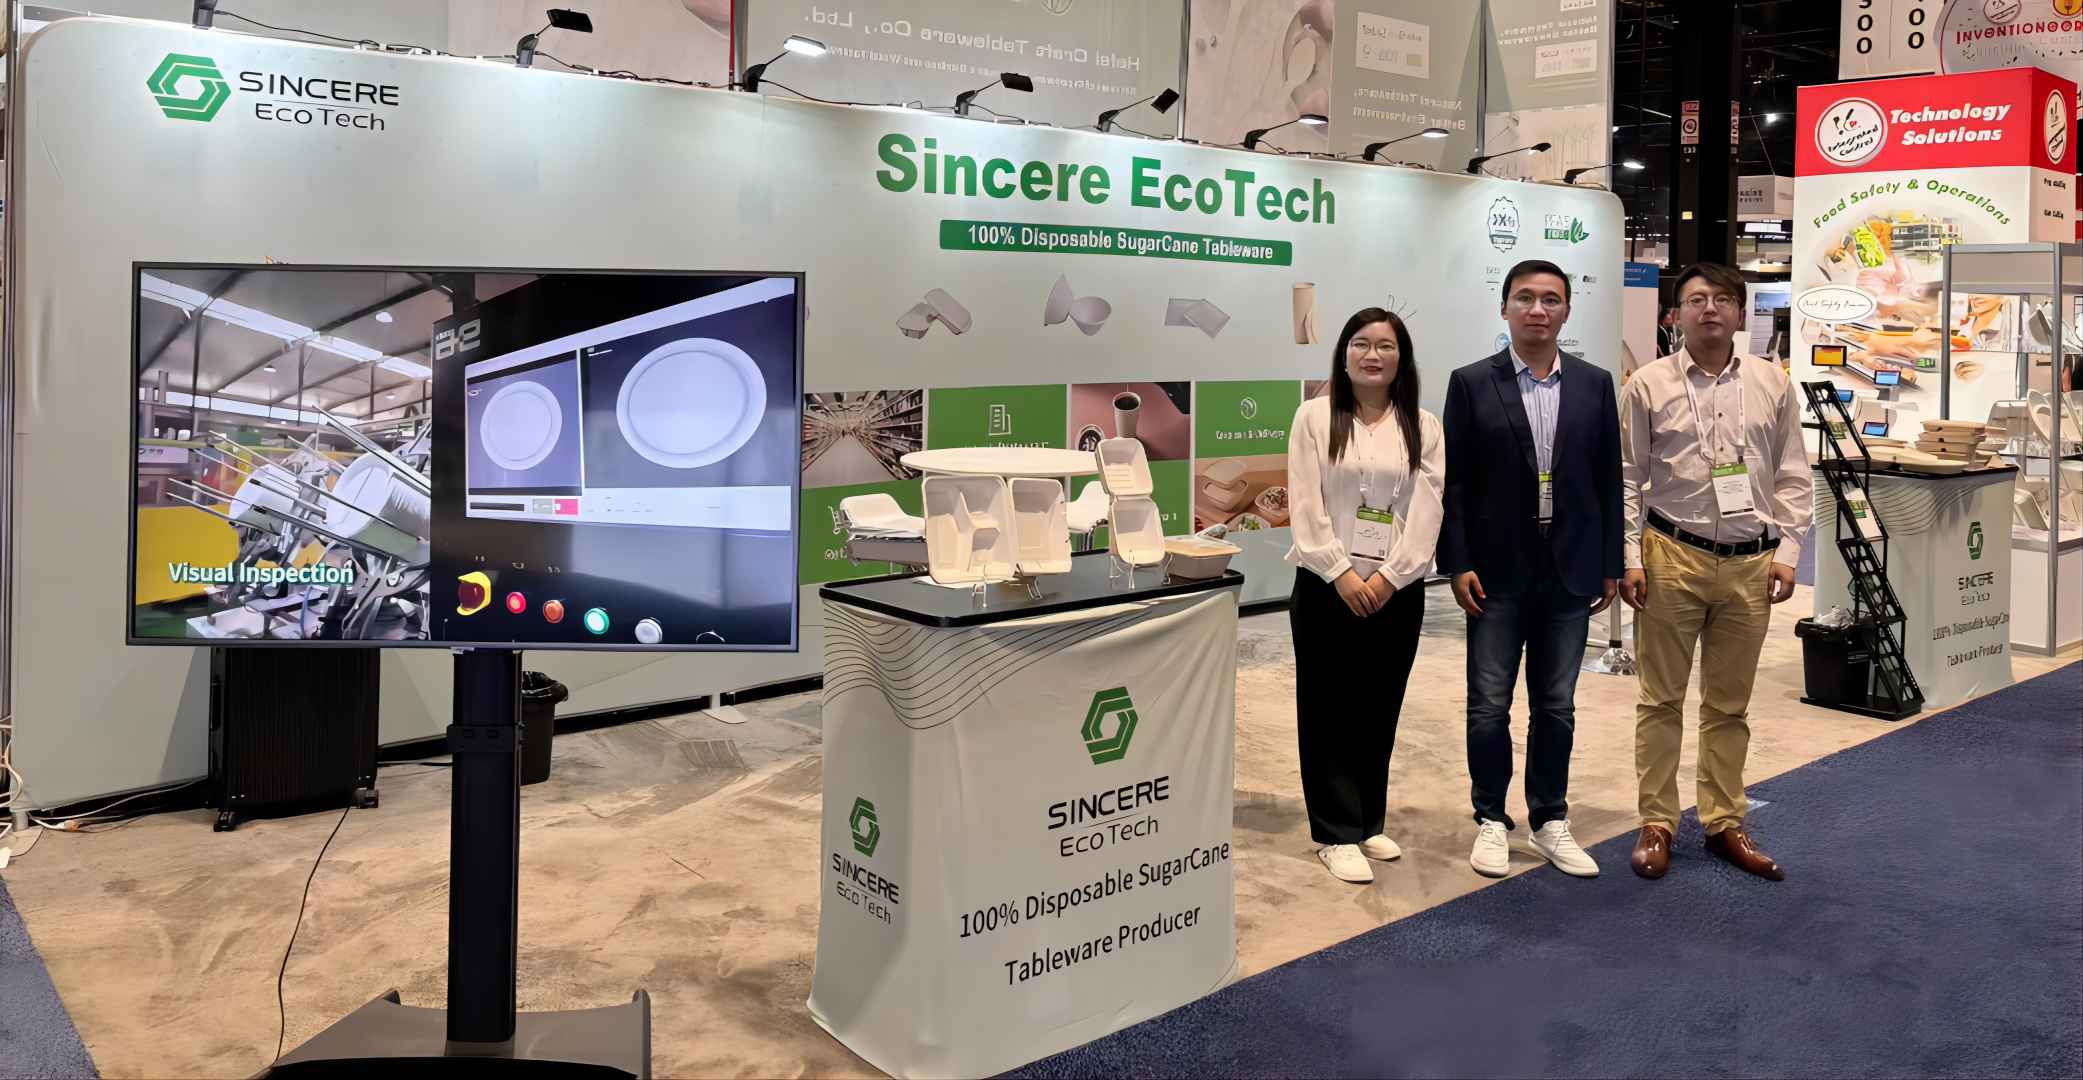 Sincere EcoTech has once again landed on the National Restaurant Association Show